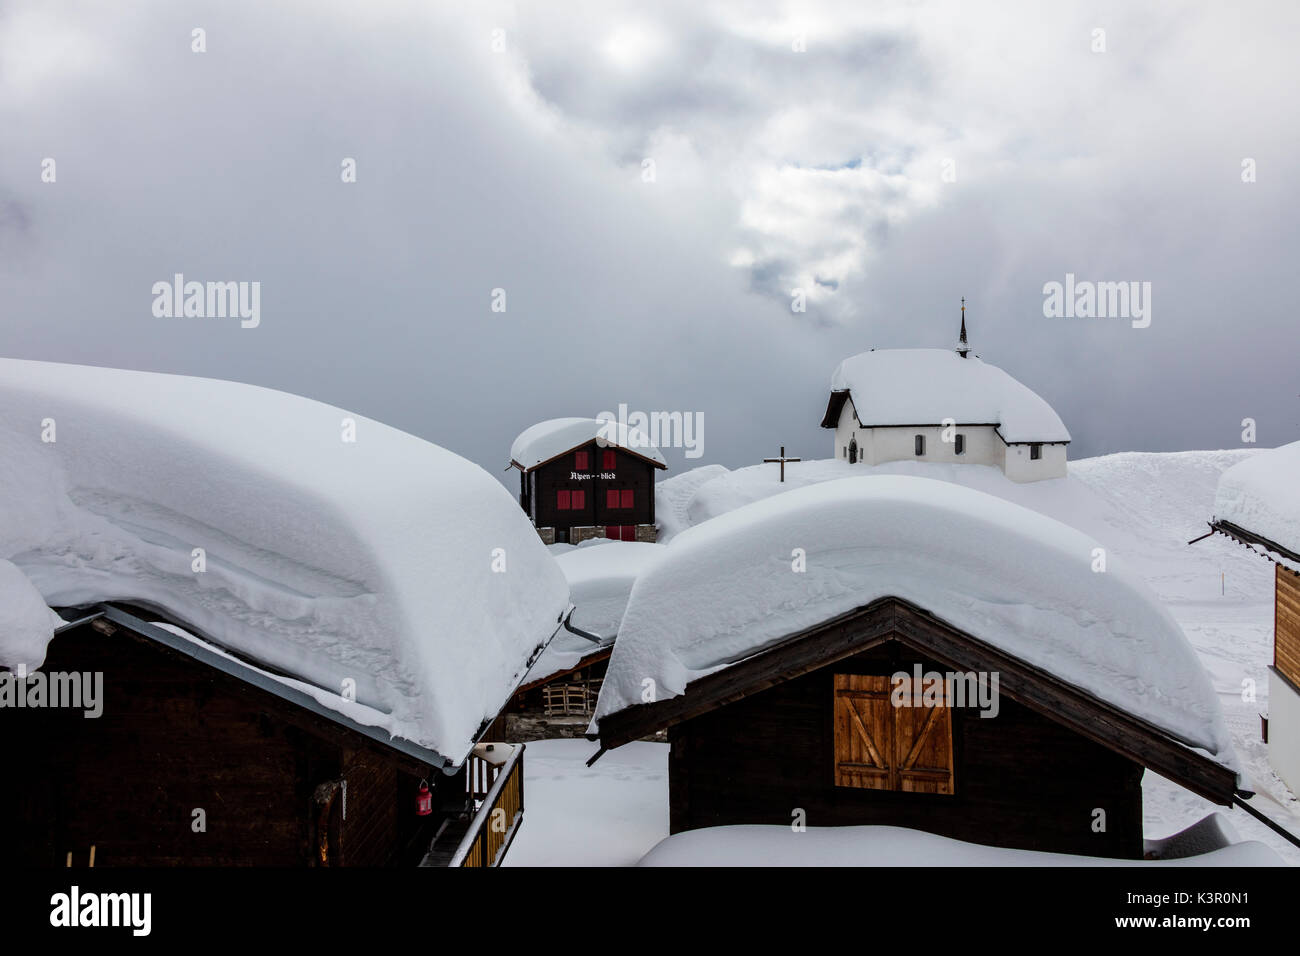 Clouds frame the mountain huts and church covered with snow Bettmeralp district of Raron canton of Valais Switzerland Europe Stock Photo